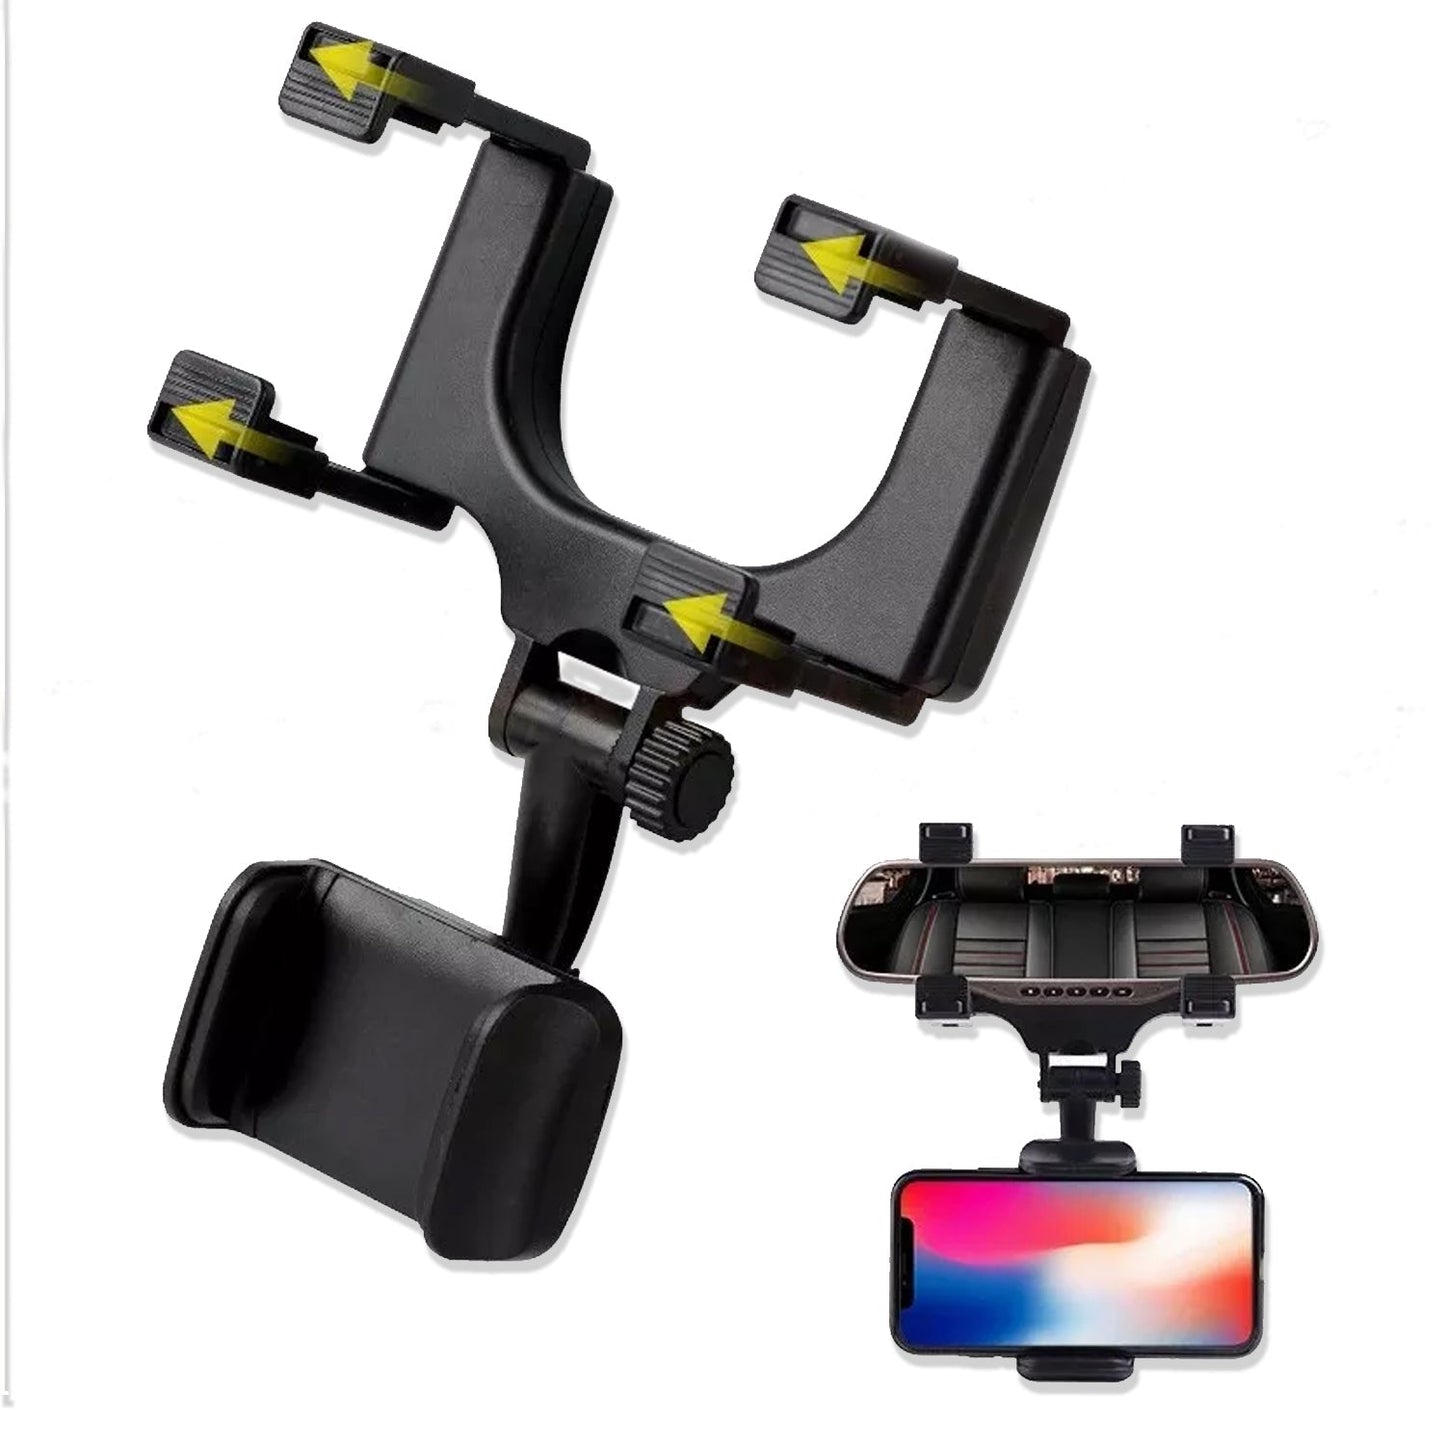 6279 Rear View Mobile Holder Universal Vehicle Rear View Mirror Mobile phone Mount Stand DeoDap